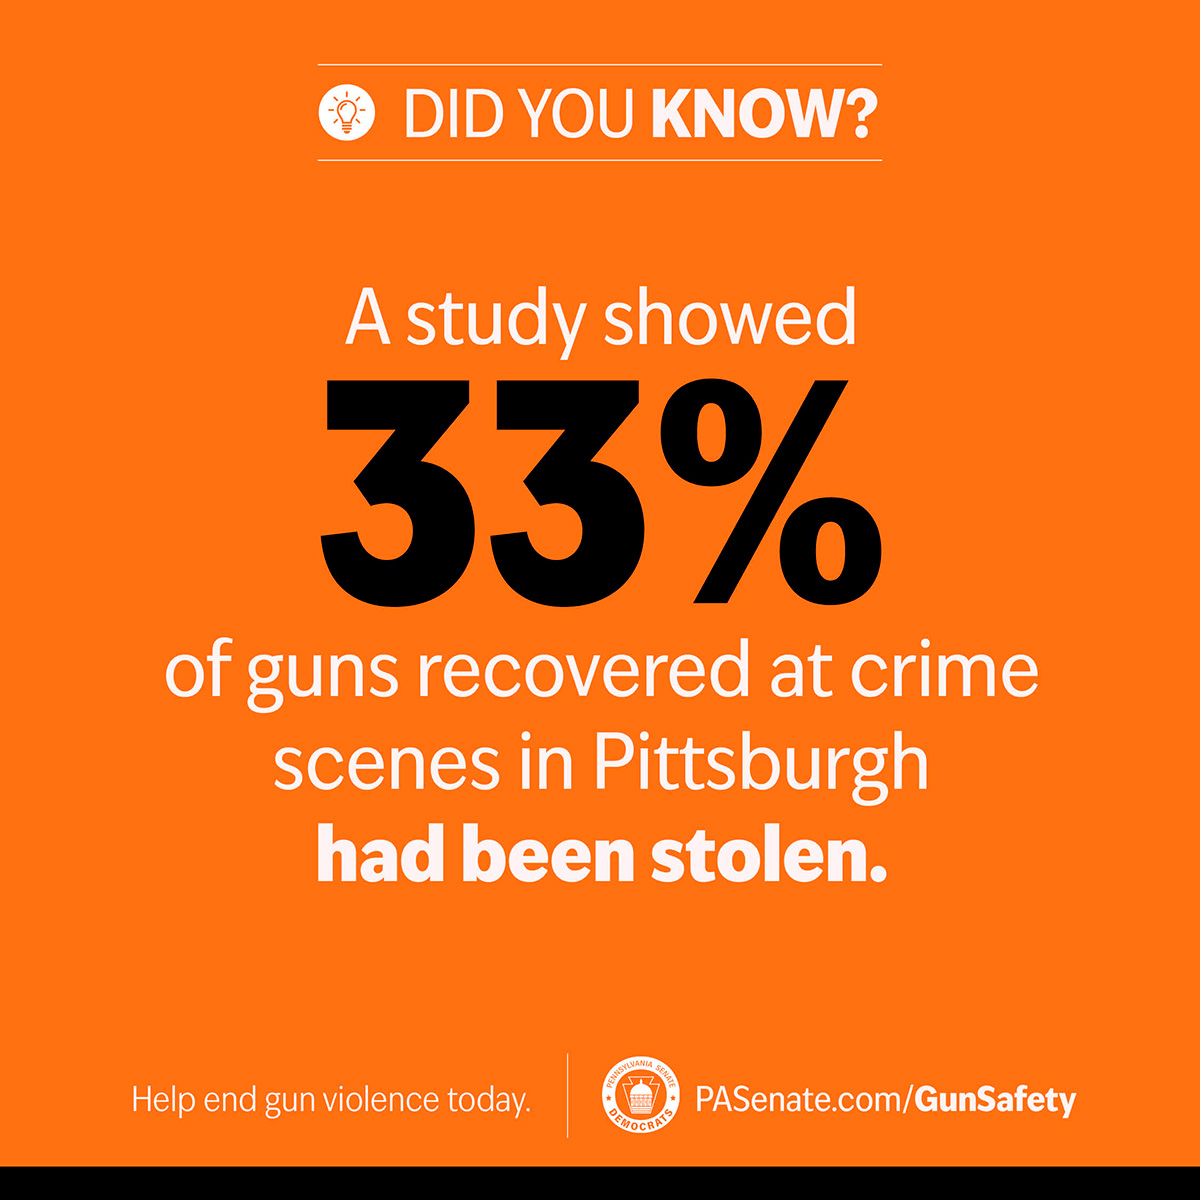 Did you know? A study showed 33% of guns recovered at a crime scenes in Pittsburgh had been stolen.